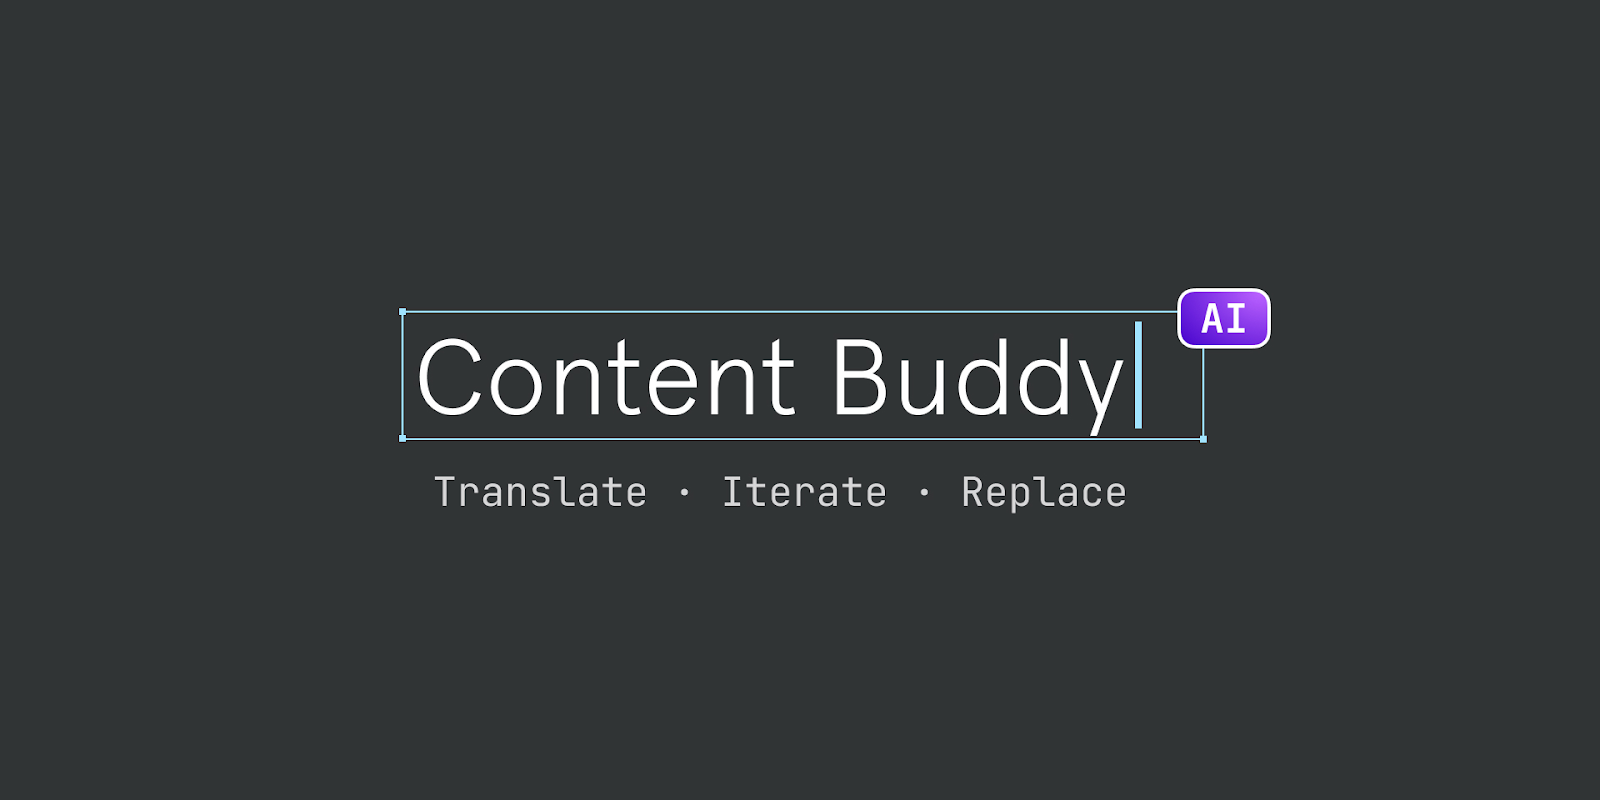 Content buddy